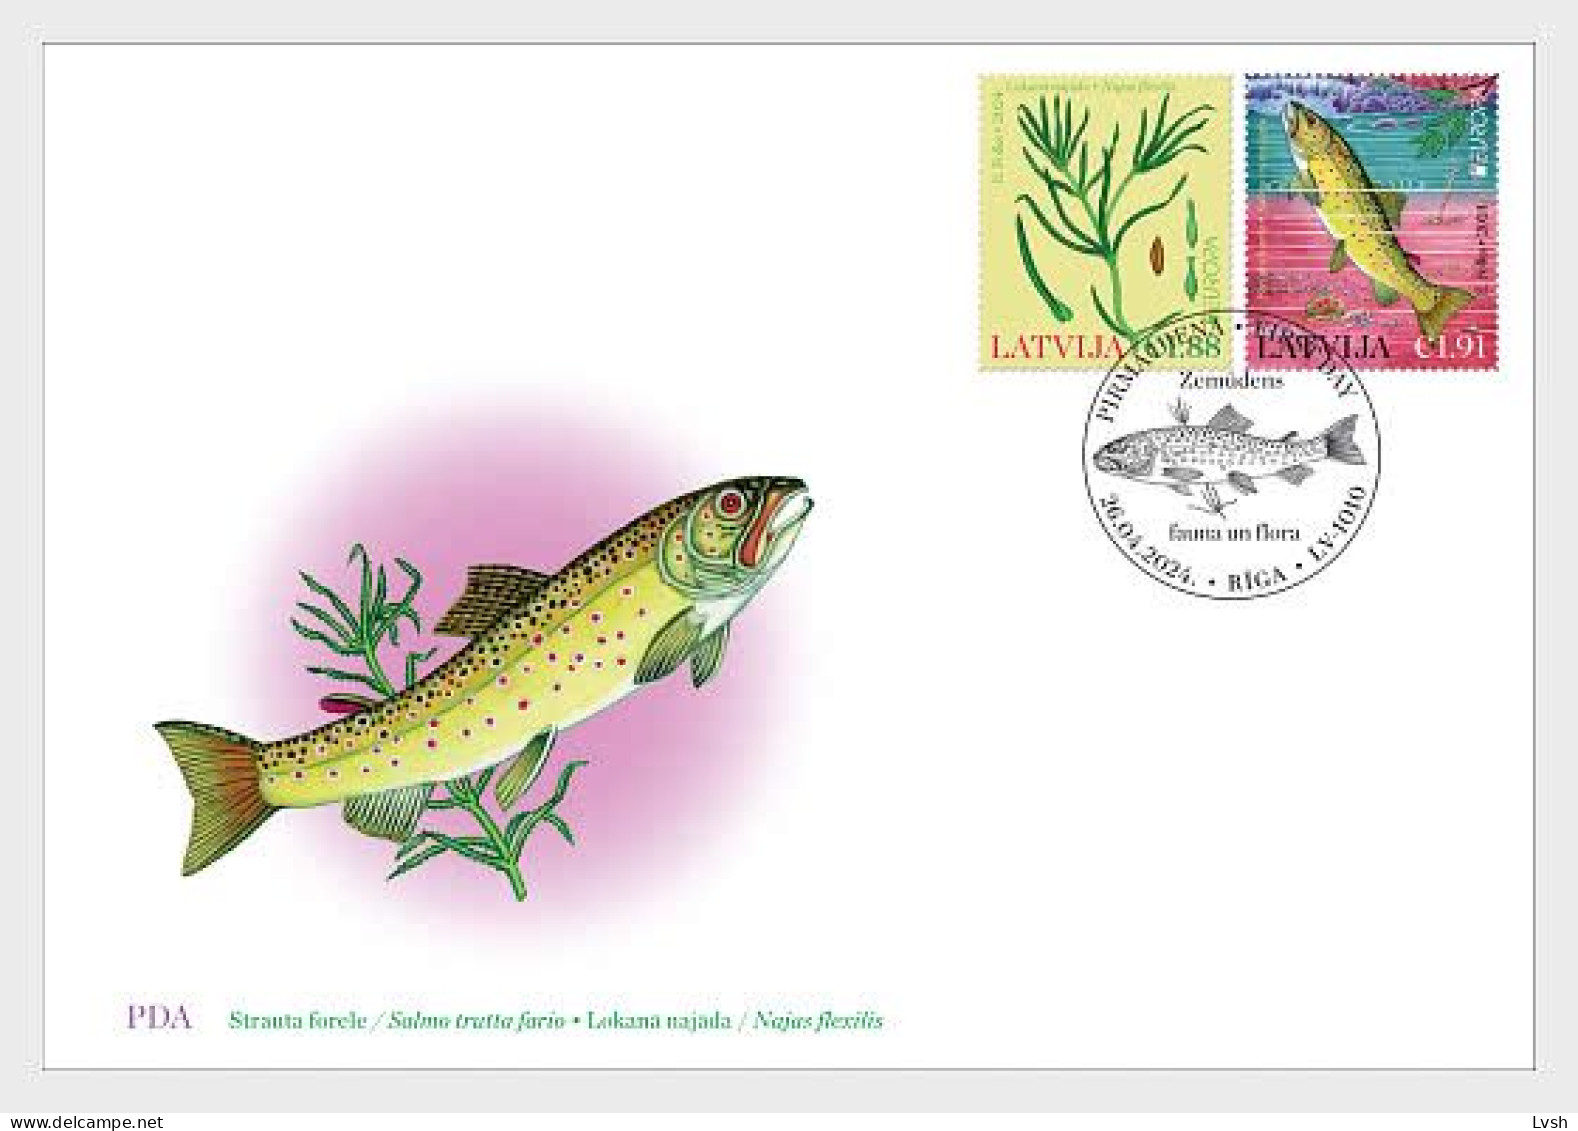 Latvia.2024.Europa CEPT.Underwater Fauna And Flora.FDC. - Lettland